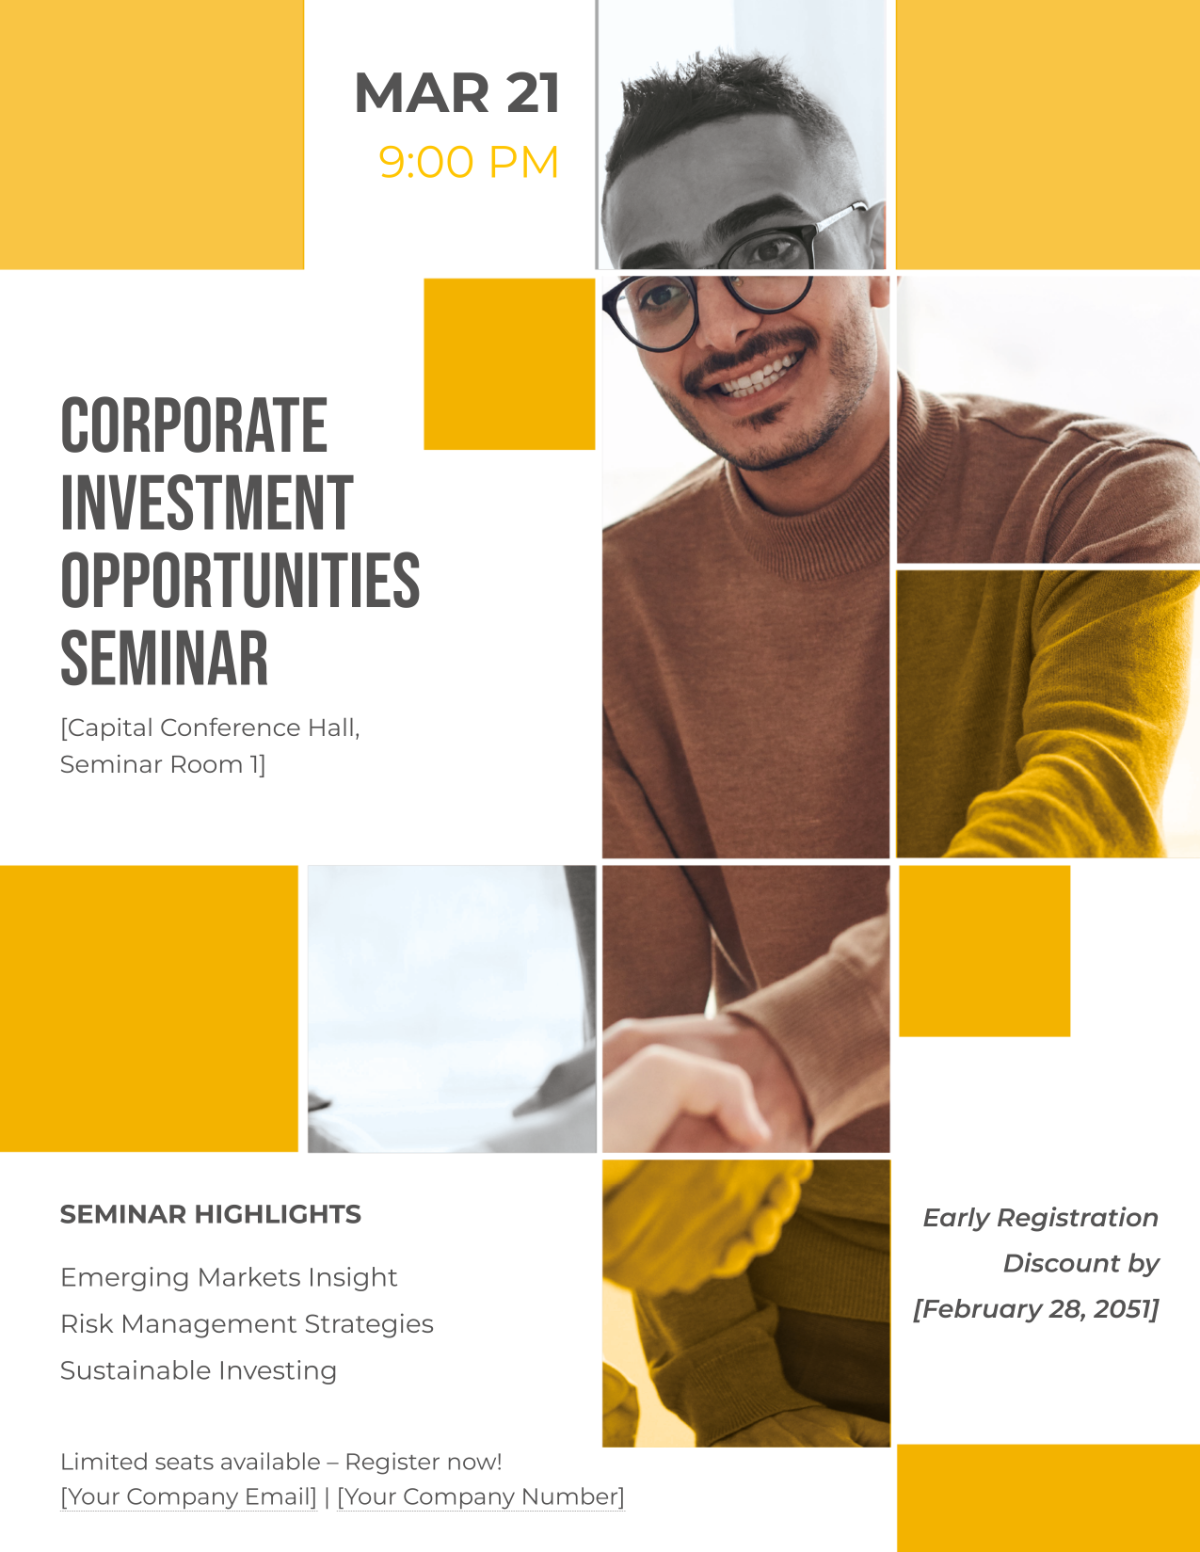 Corporate Investment Opportunities Seminar Flyer Template